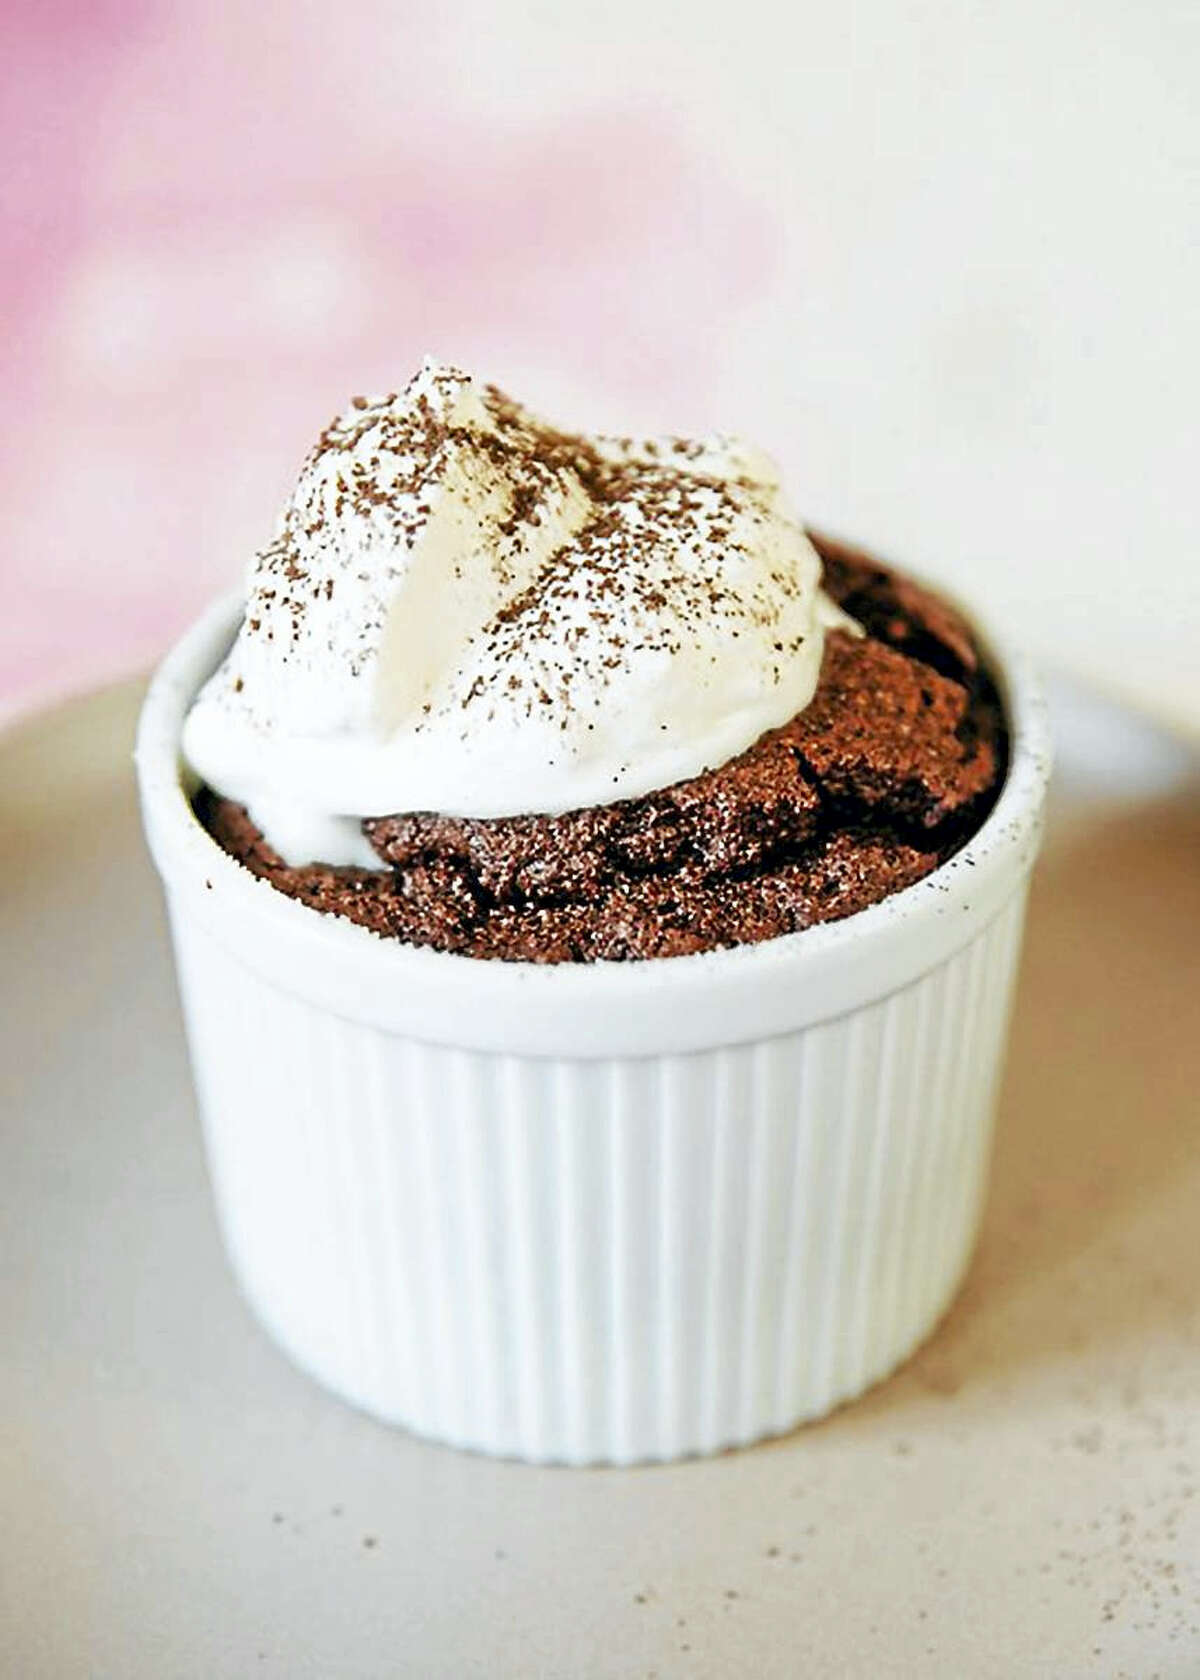 While there’s no need to rush to the table, souffles are best when served warm.